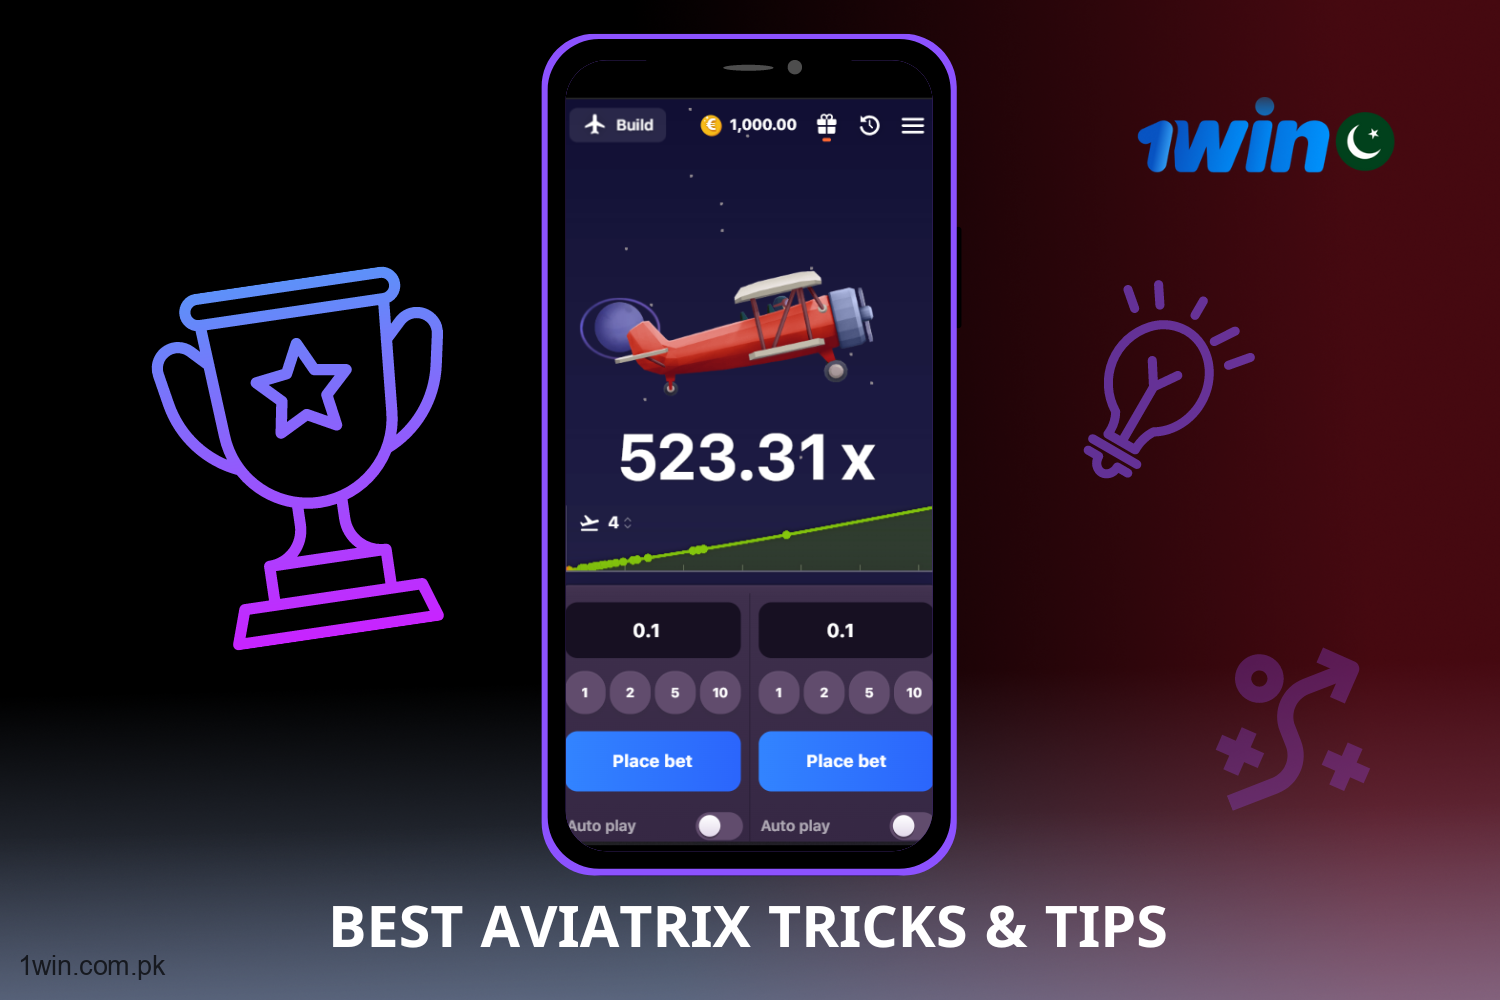 In order to maximize their chances of winning, Aviatrix players from Pakistan should familiarize themselves with the rules and strategies of the game.